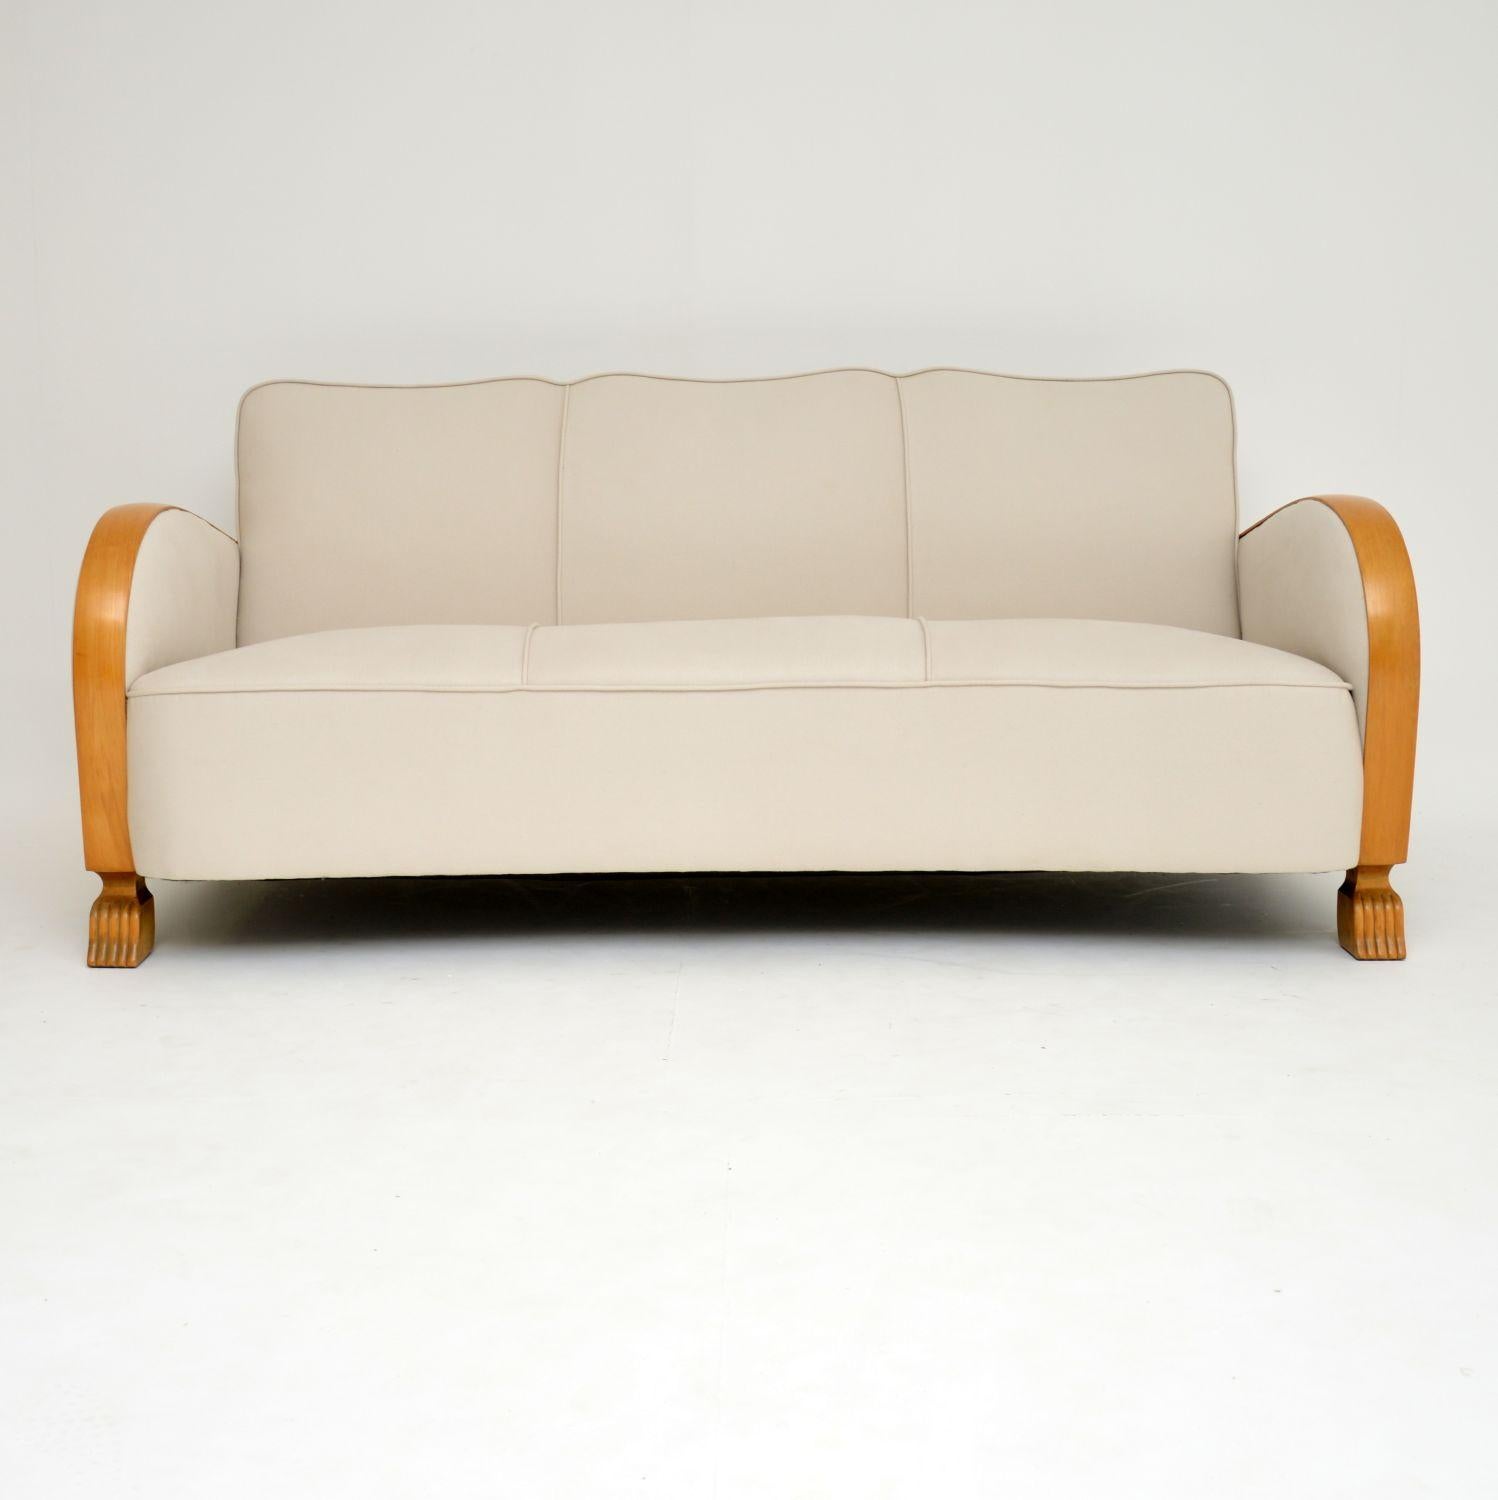 Very stylish original Swedish Art Deco three-seat sofa with satin birch arms and feet, dating to circa 1930s. It’s in excellent condition, having just been polished and re-upholstered in our regular cream cotton linen fabric. This sofa is also very